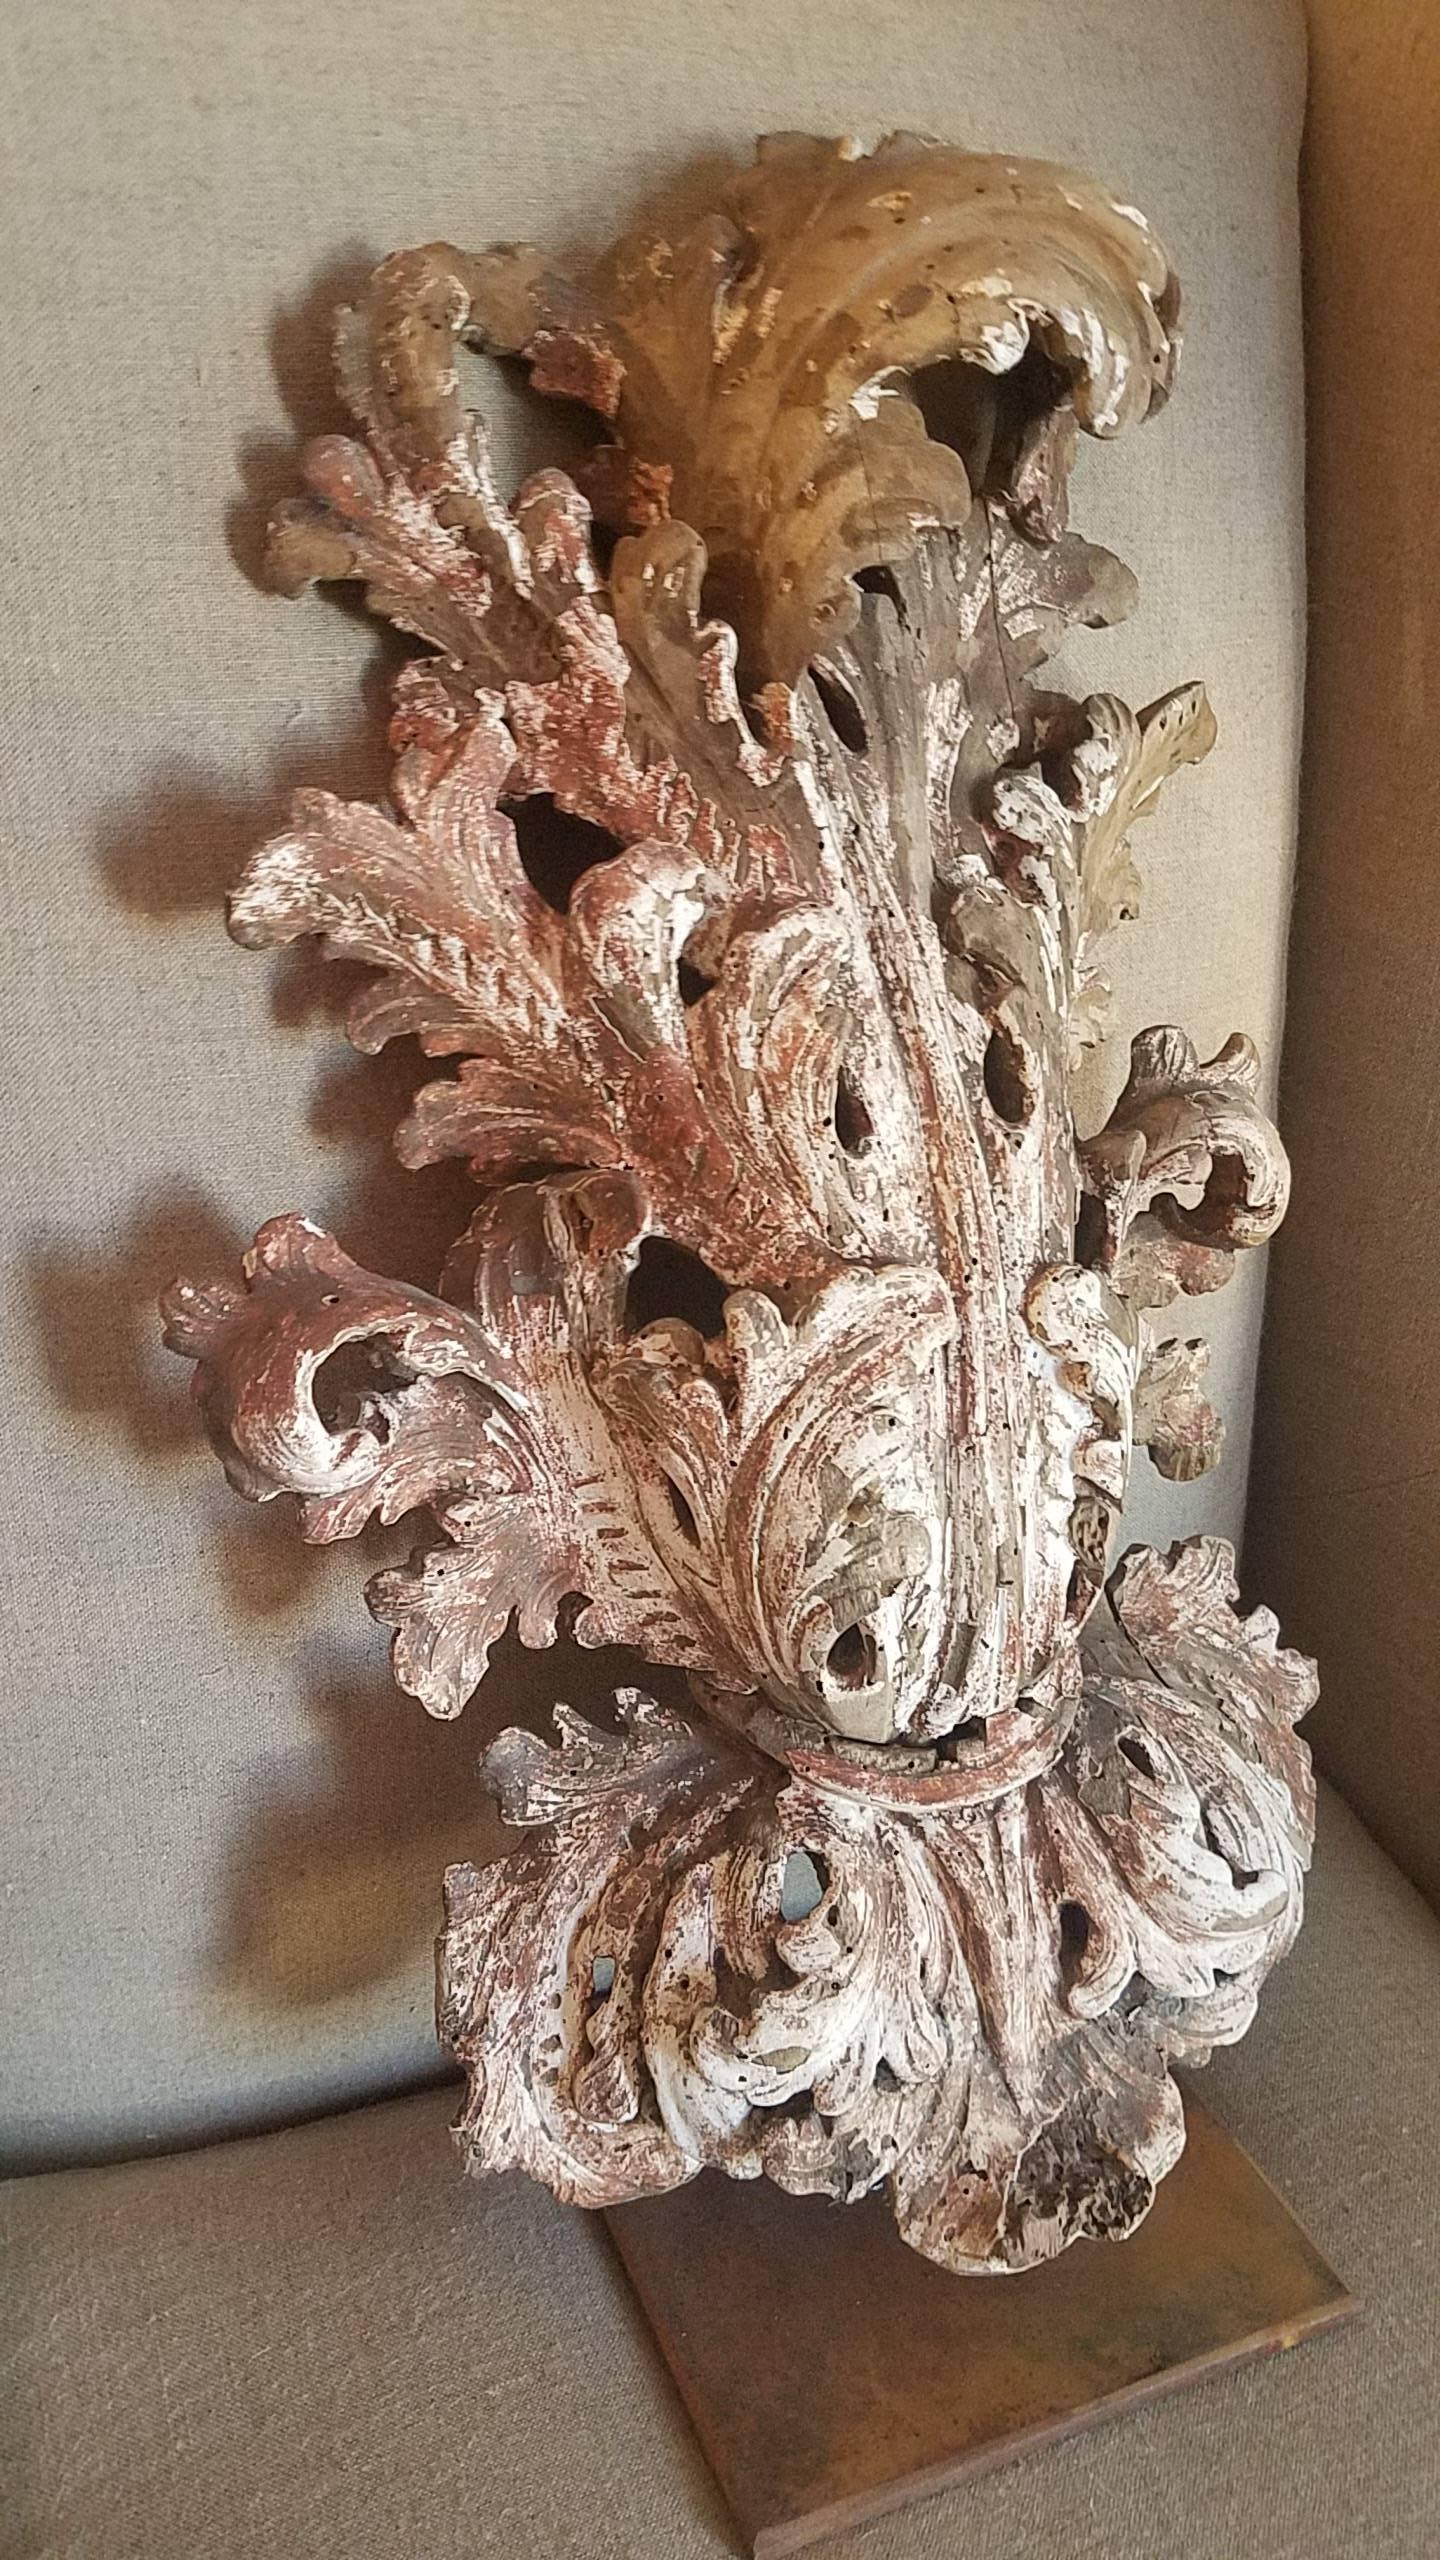 Spectacular acanthus leaf fragment with residual original paint in very good condition with no repairs or restorations.  Its scale is generous and has a secure metal mount for display.  A stunning addition to any vignette!